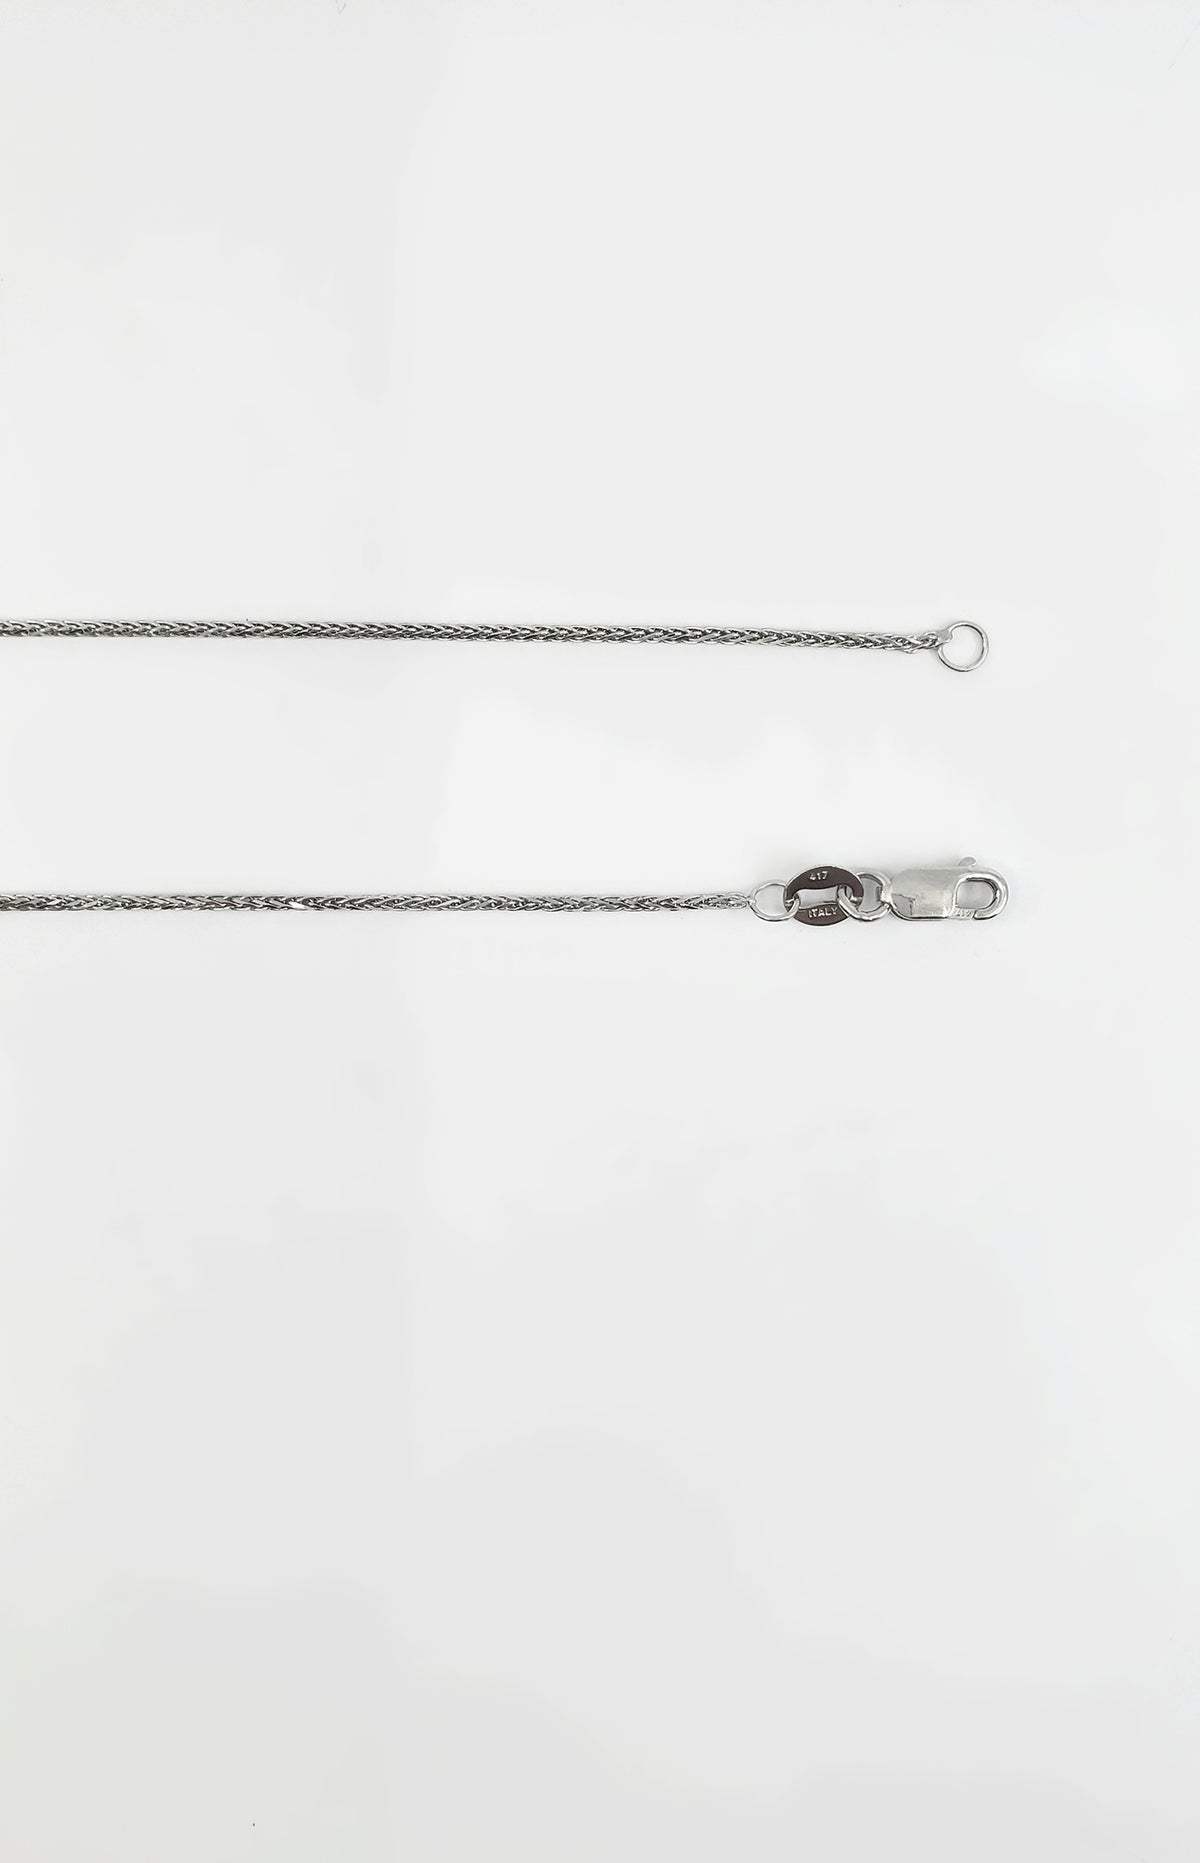 10K White Gold 0.80mm Wheat Chain with Spring Clasp - 16 Inches